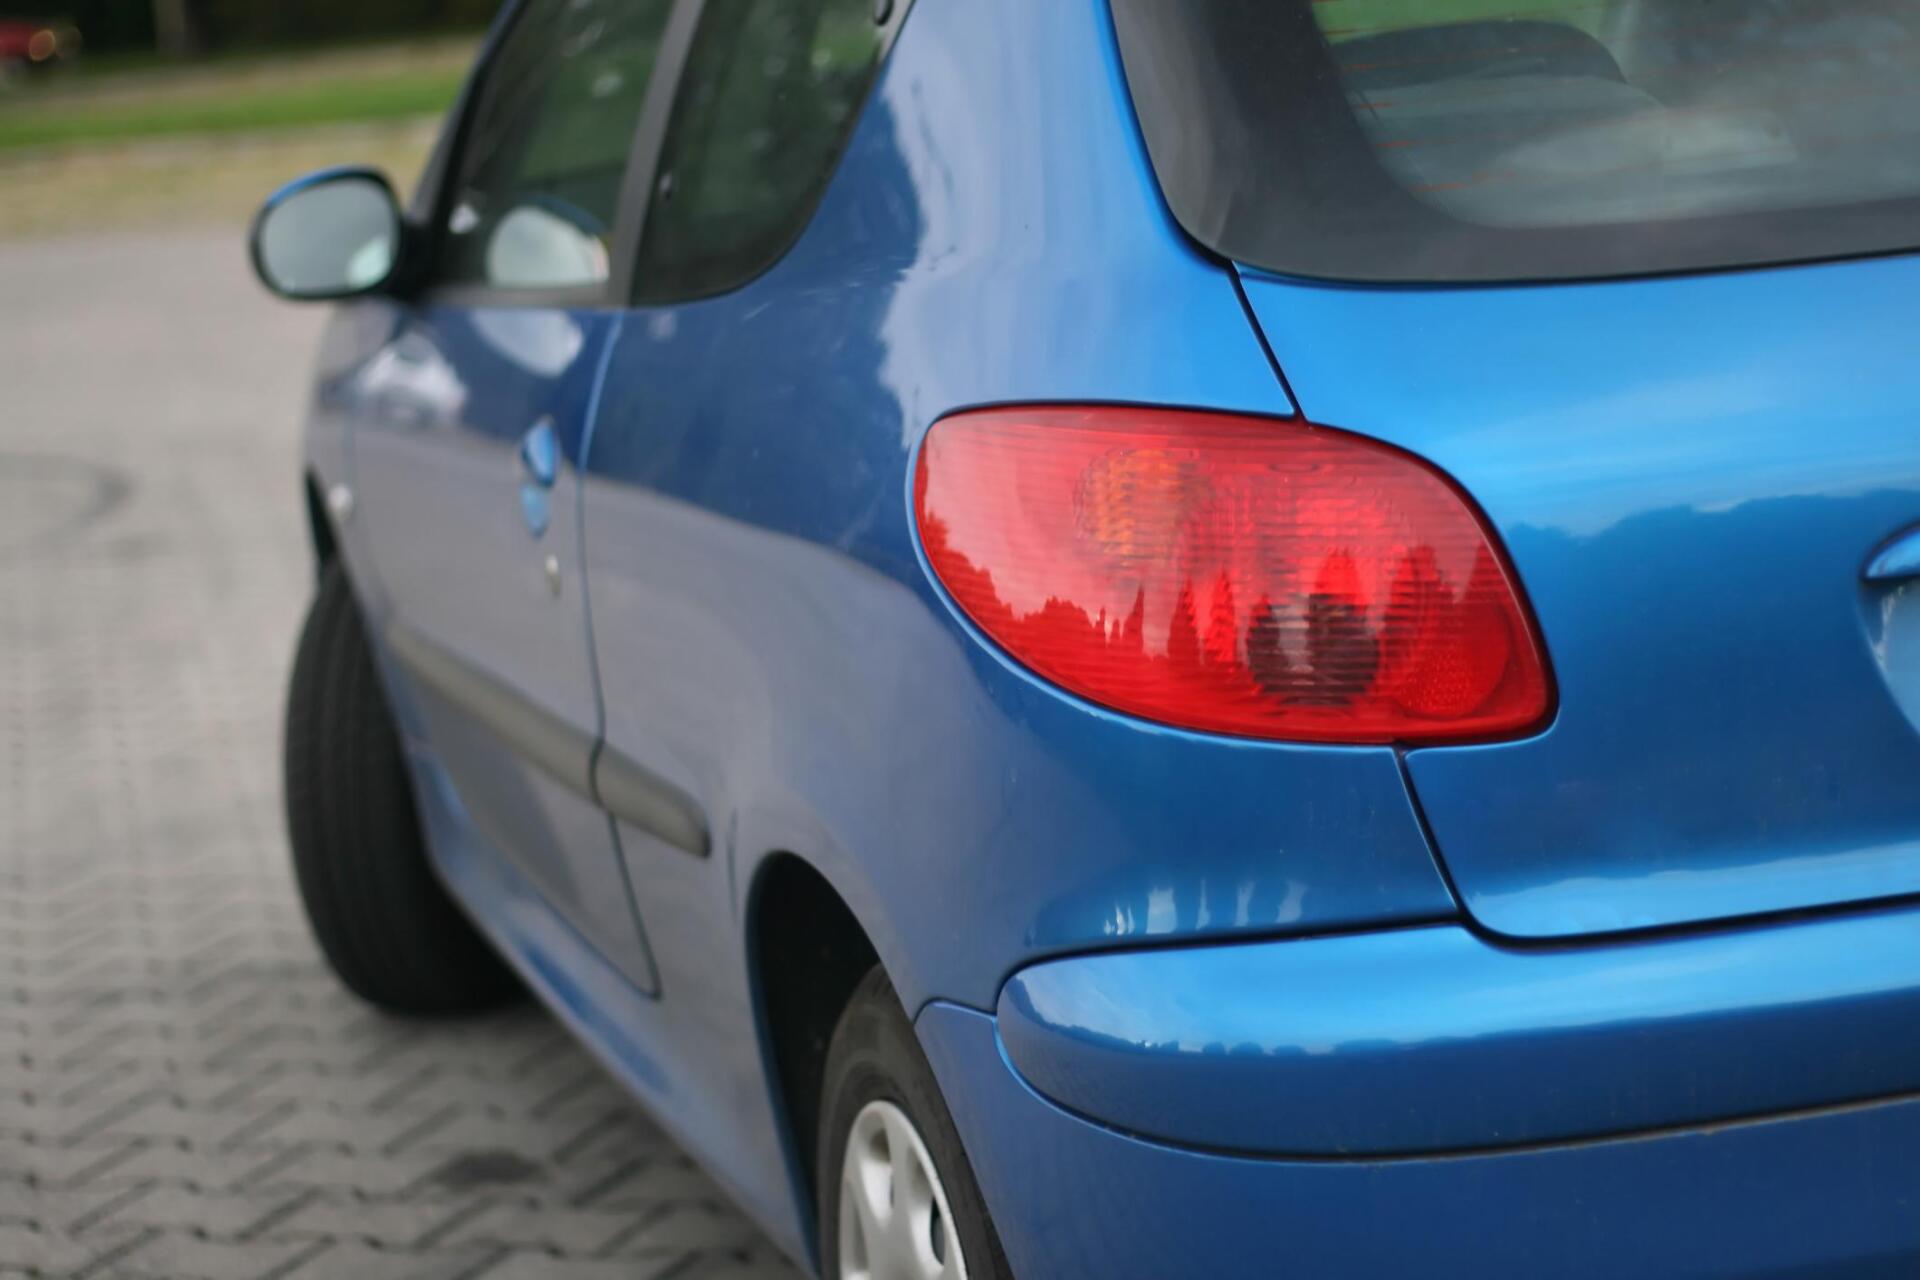 a tail part of the blue car